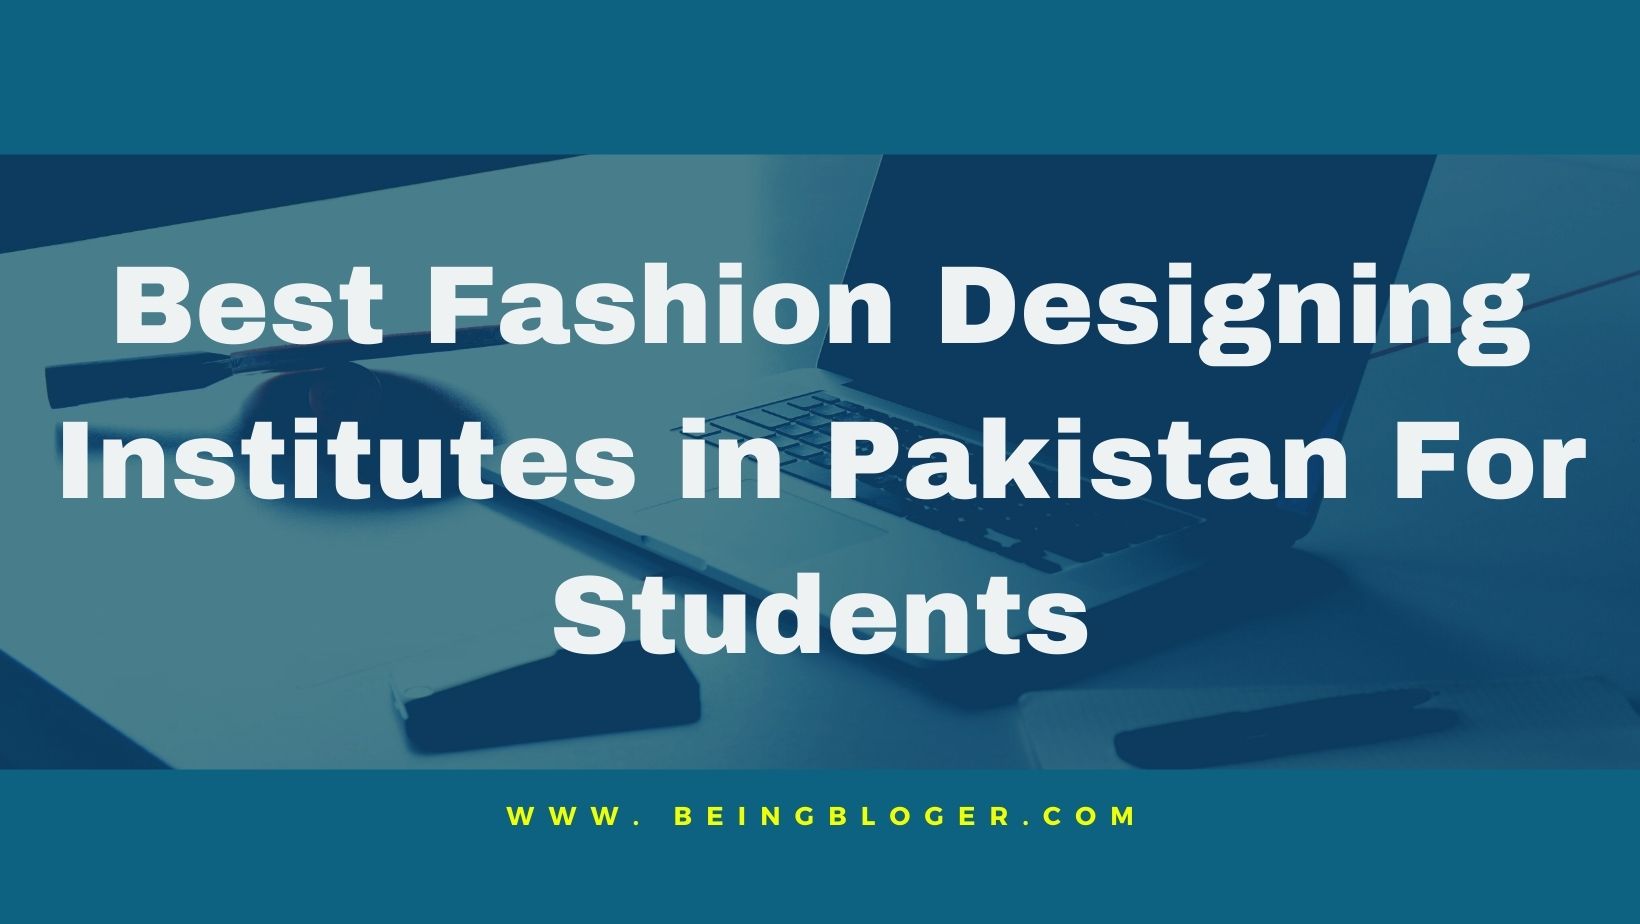 Best Fashion Designing Institutes in Pakistan For Students